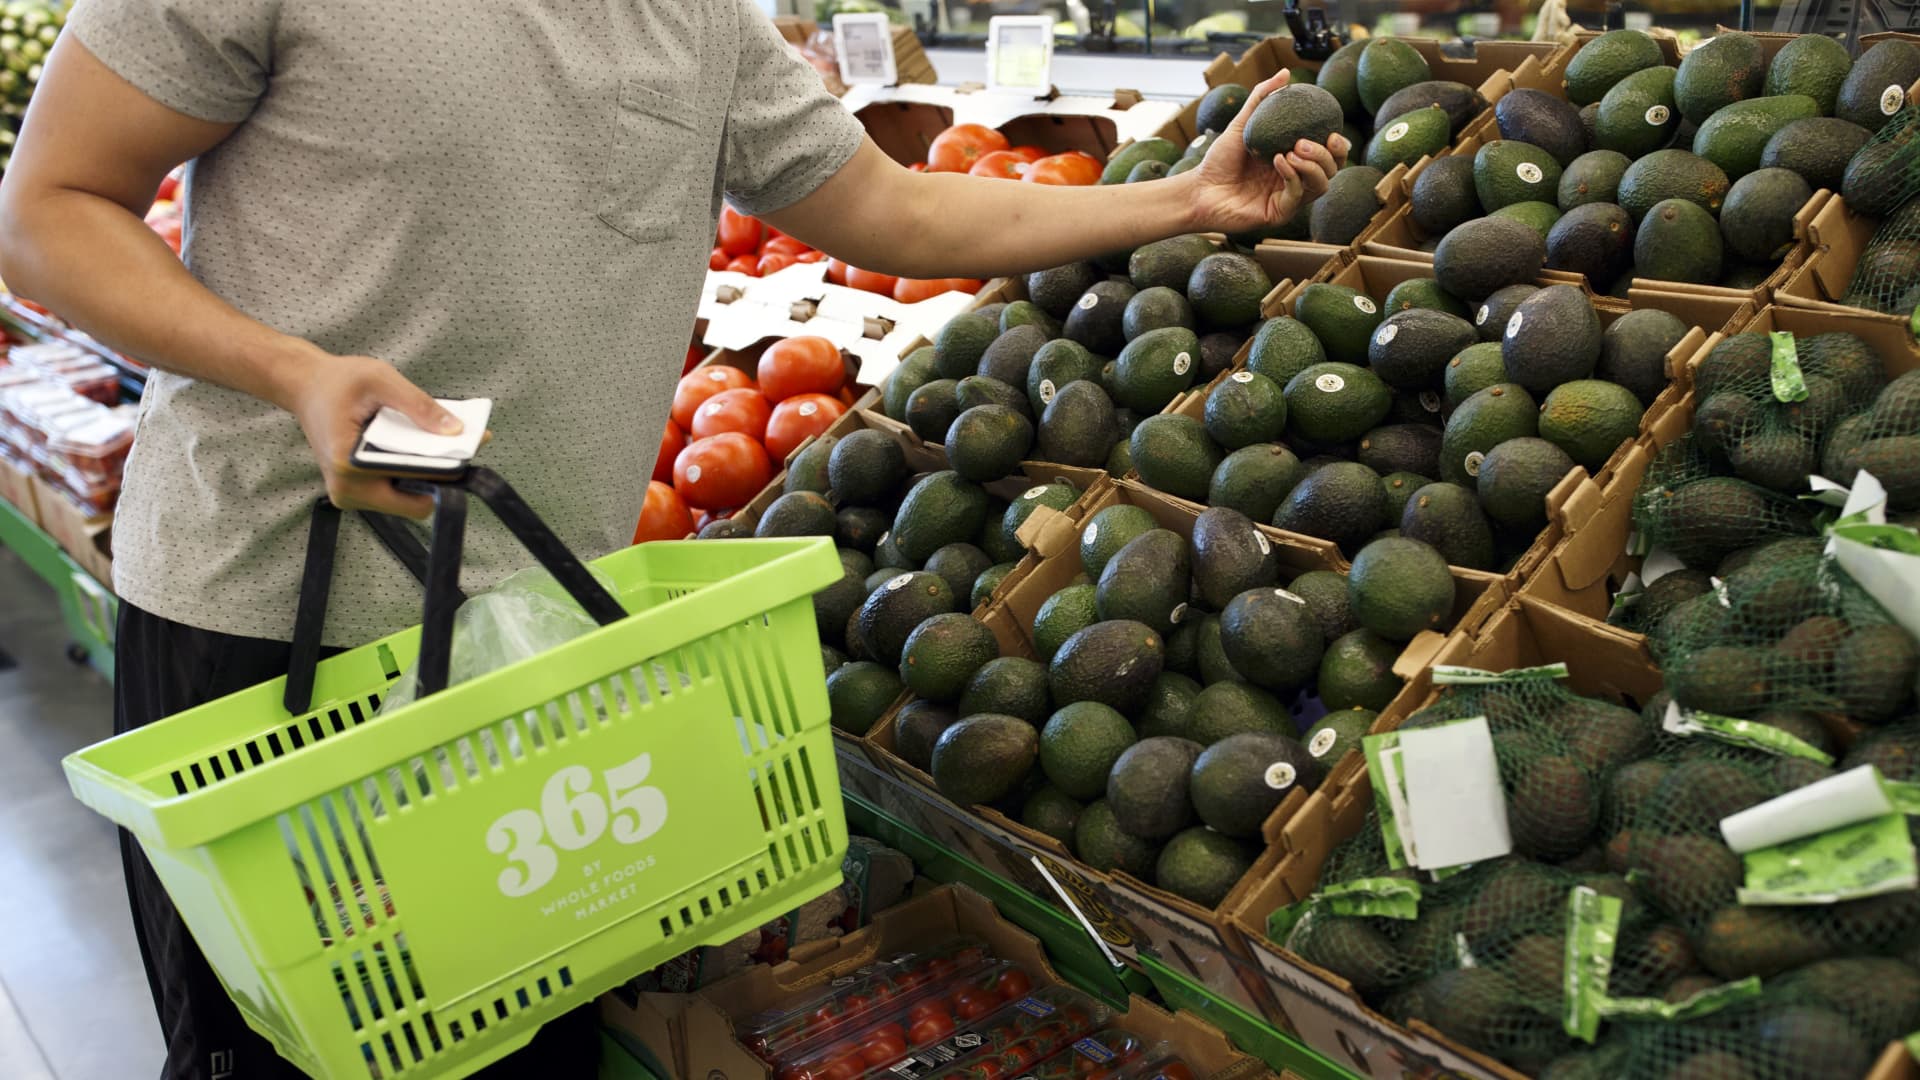 A customer browses avocados at a Whole Foods Market 365 location in Santa Monica, California.